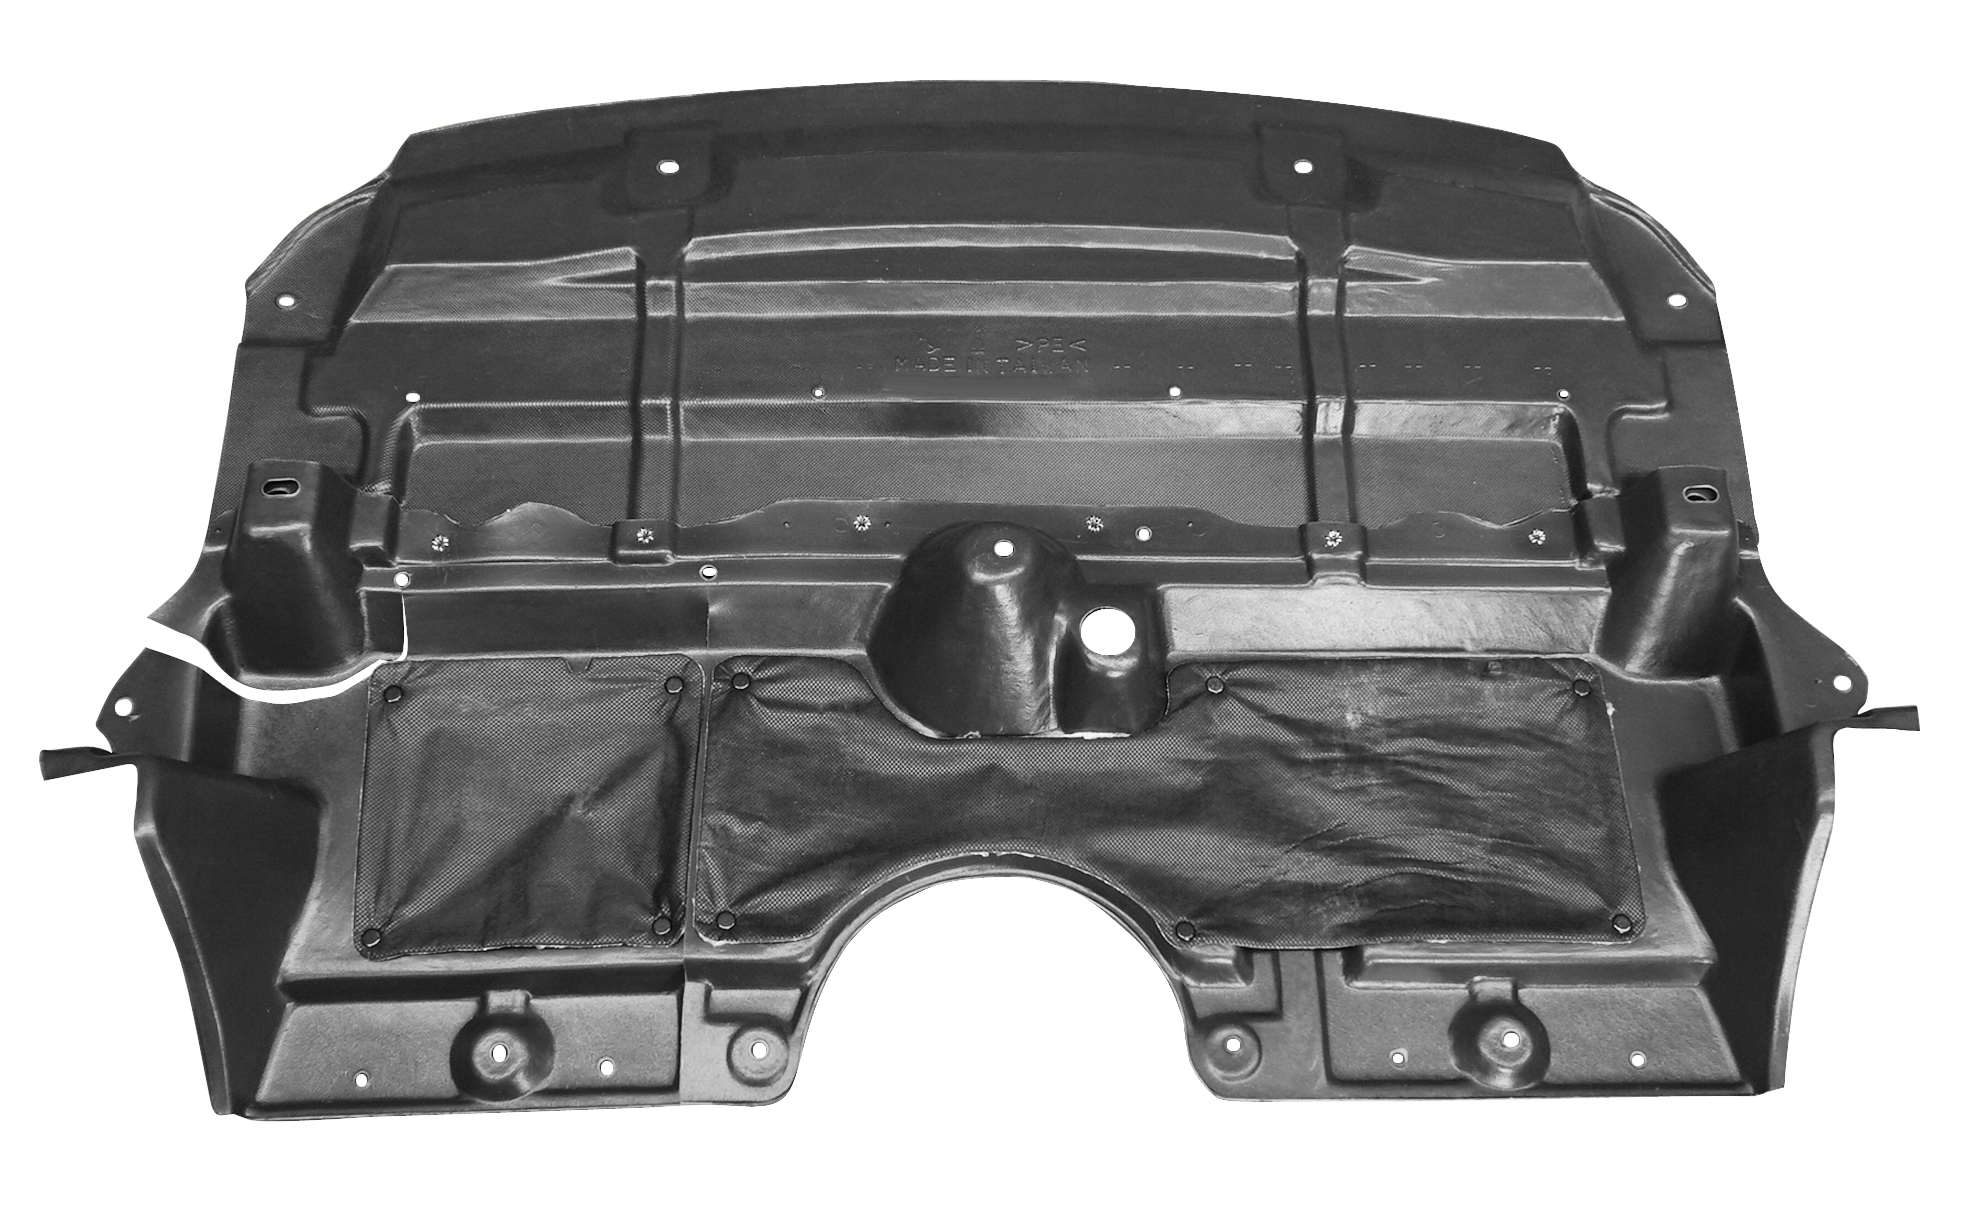 Aftermarket UNDER ENGINE COVERS for LEXUS - IS250, IS250,11-13,Lower engine cover